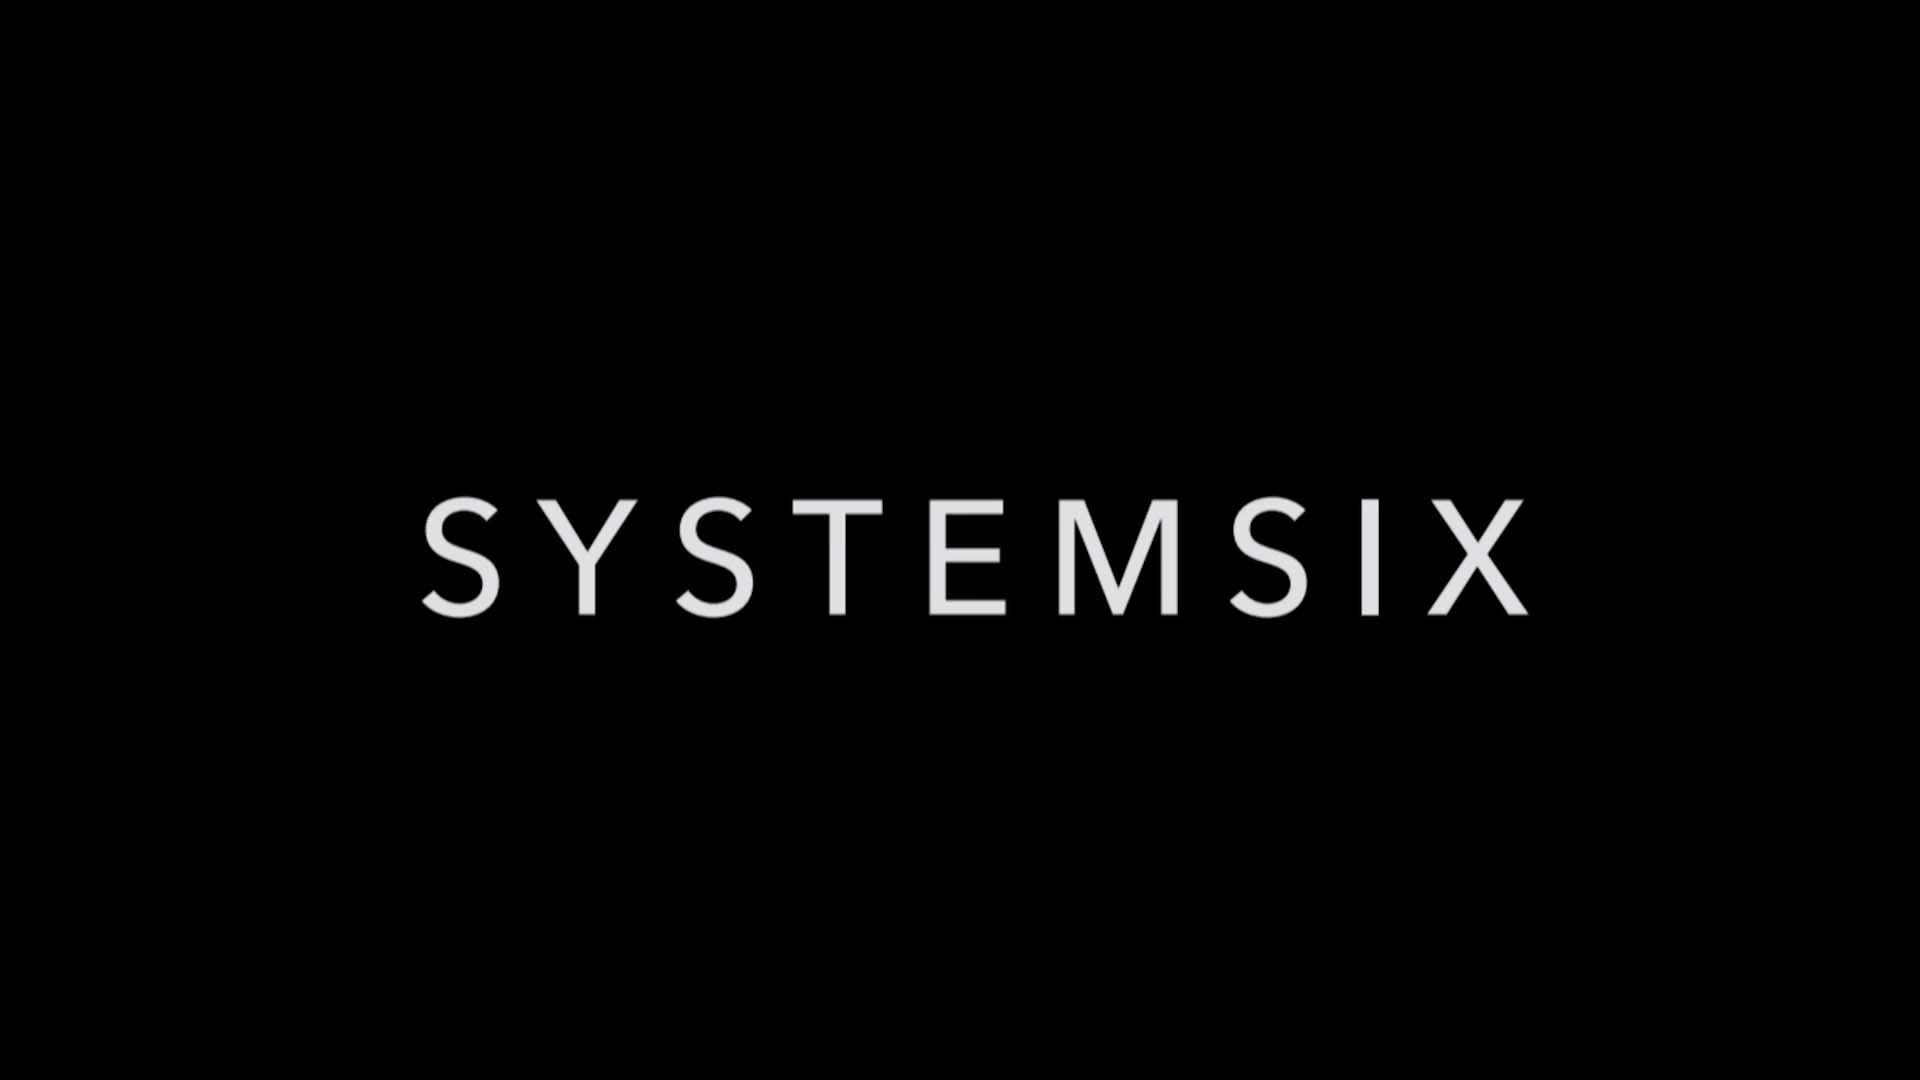 SystemSix: The Number of Speed